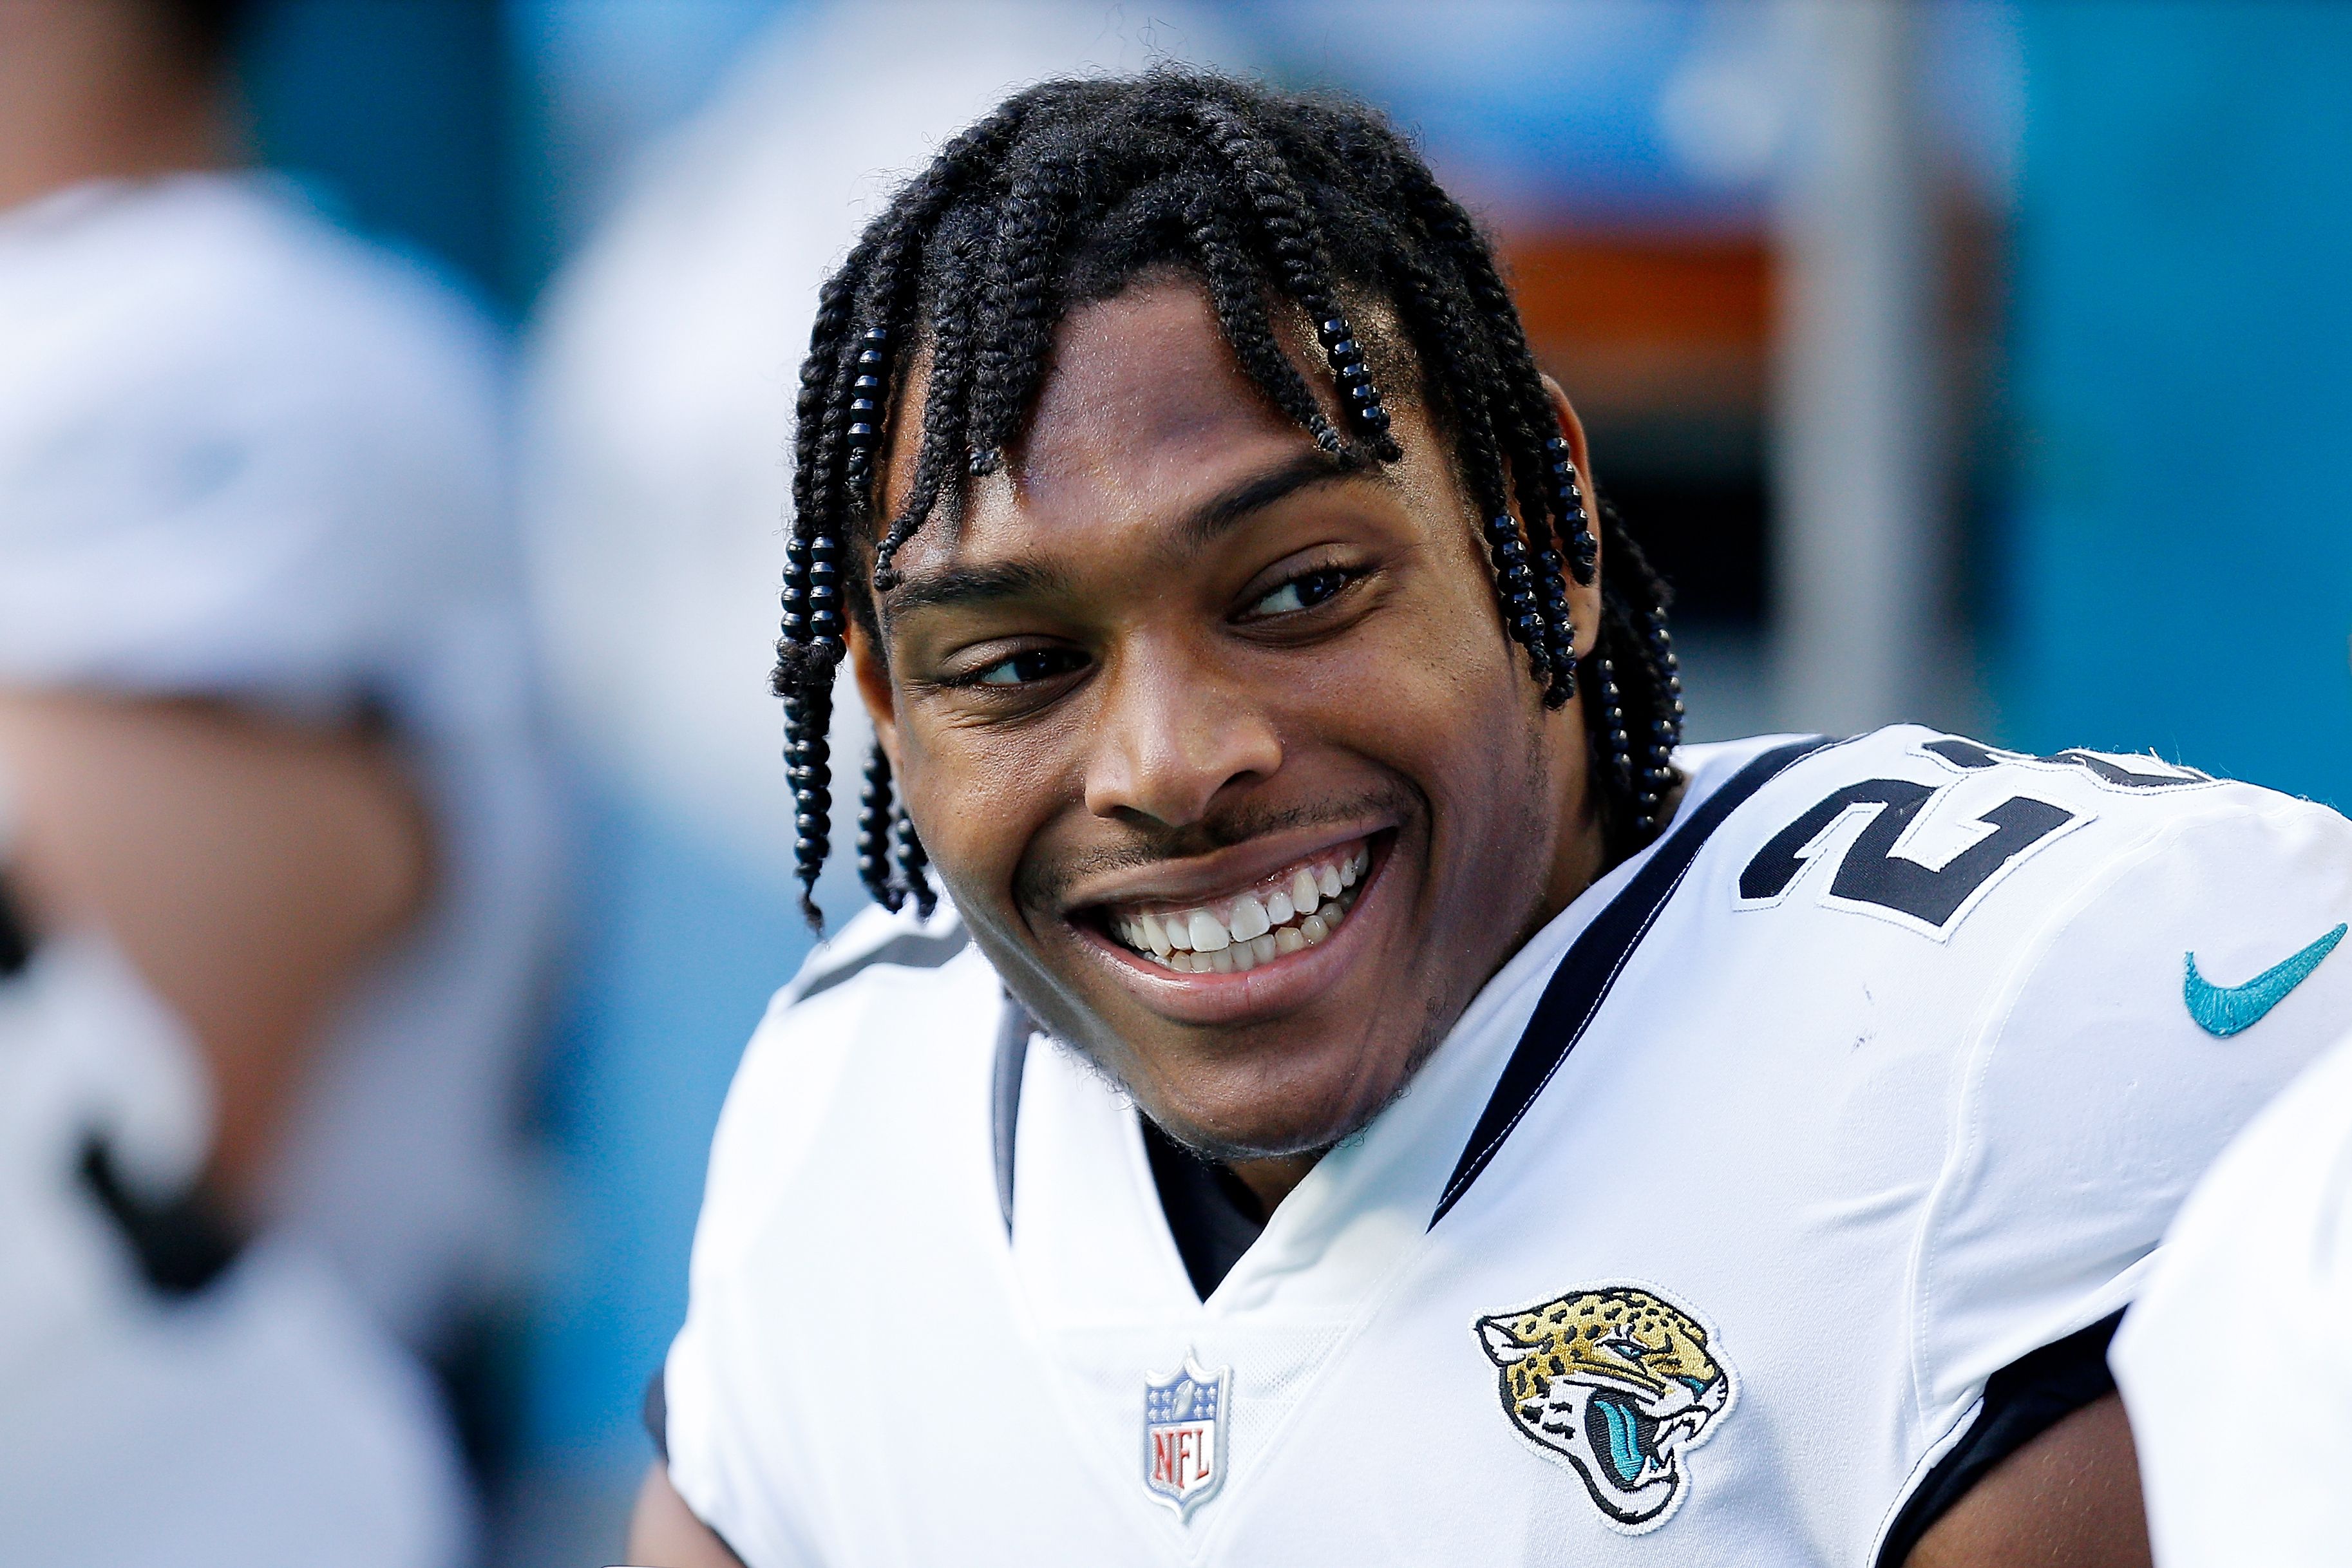 Jalen Ramsey Used to DM Opponents Girlfriends Before Games pic